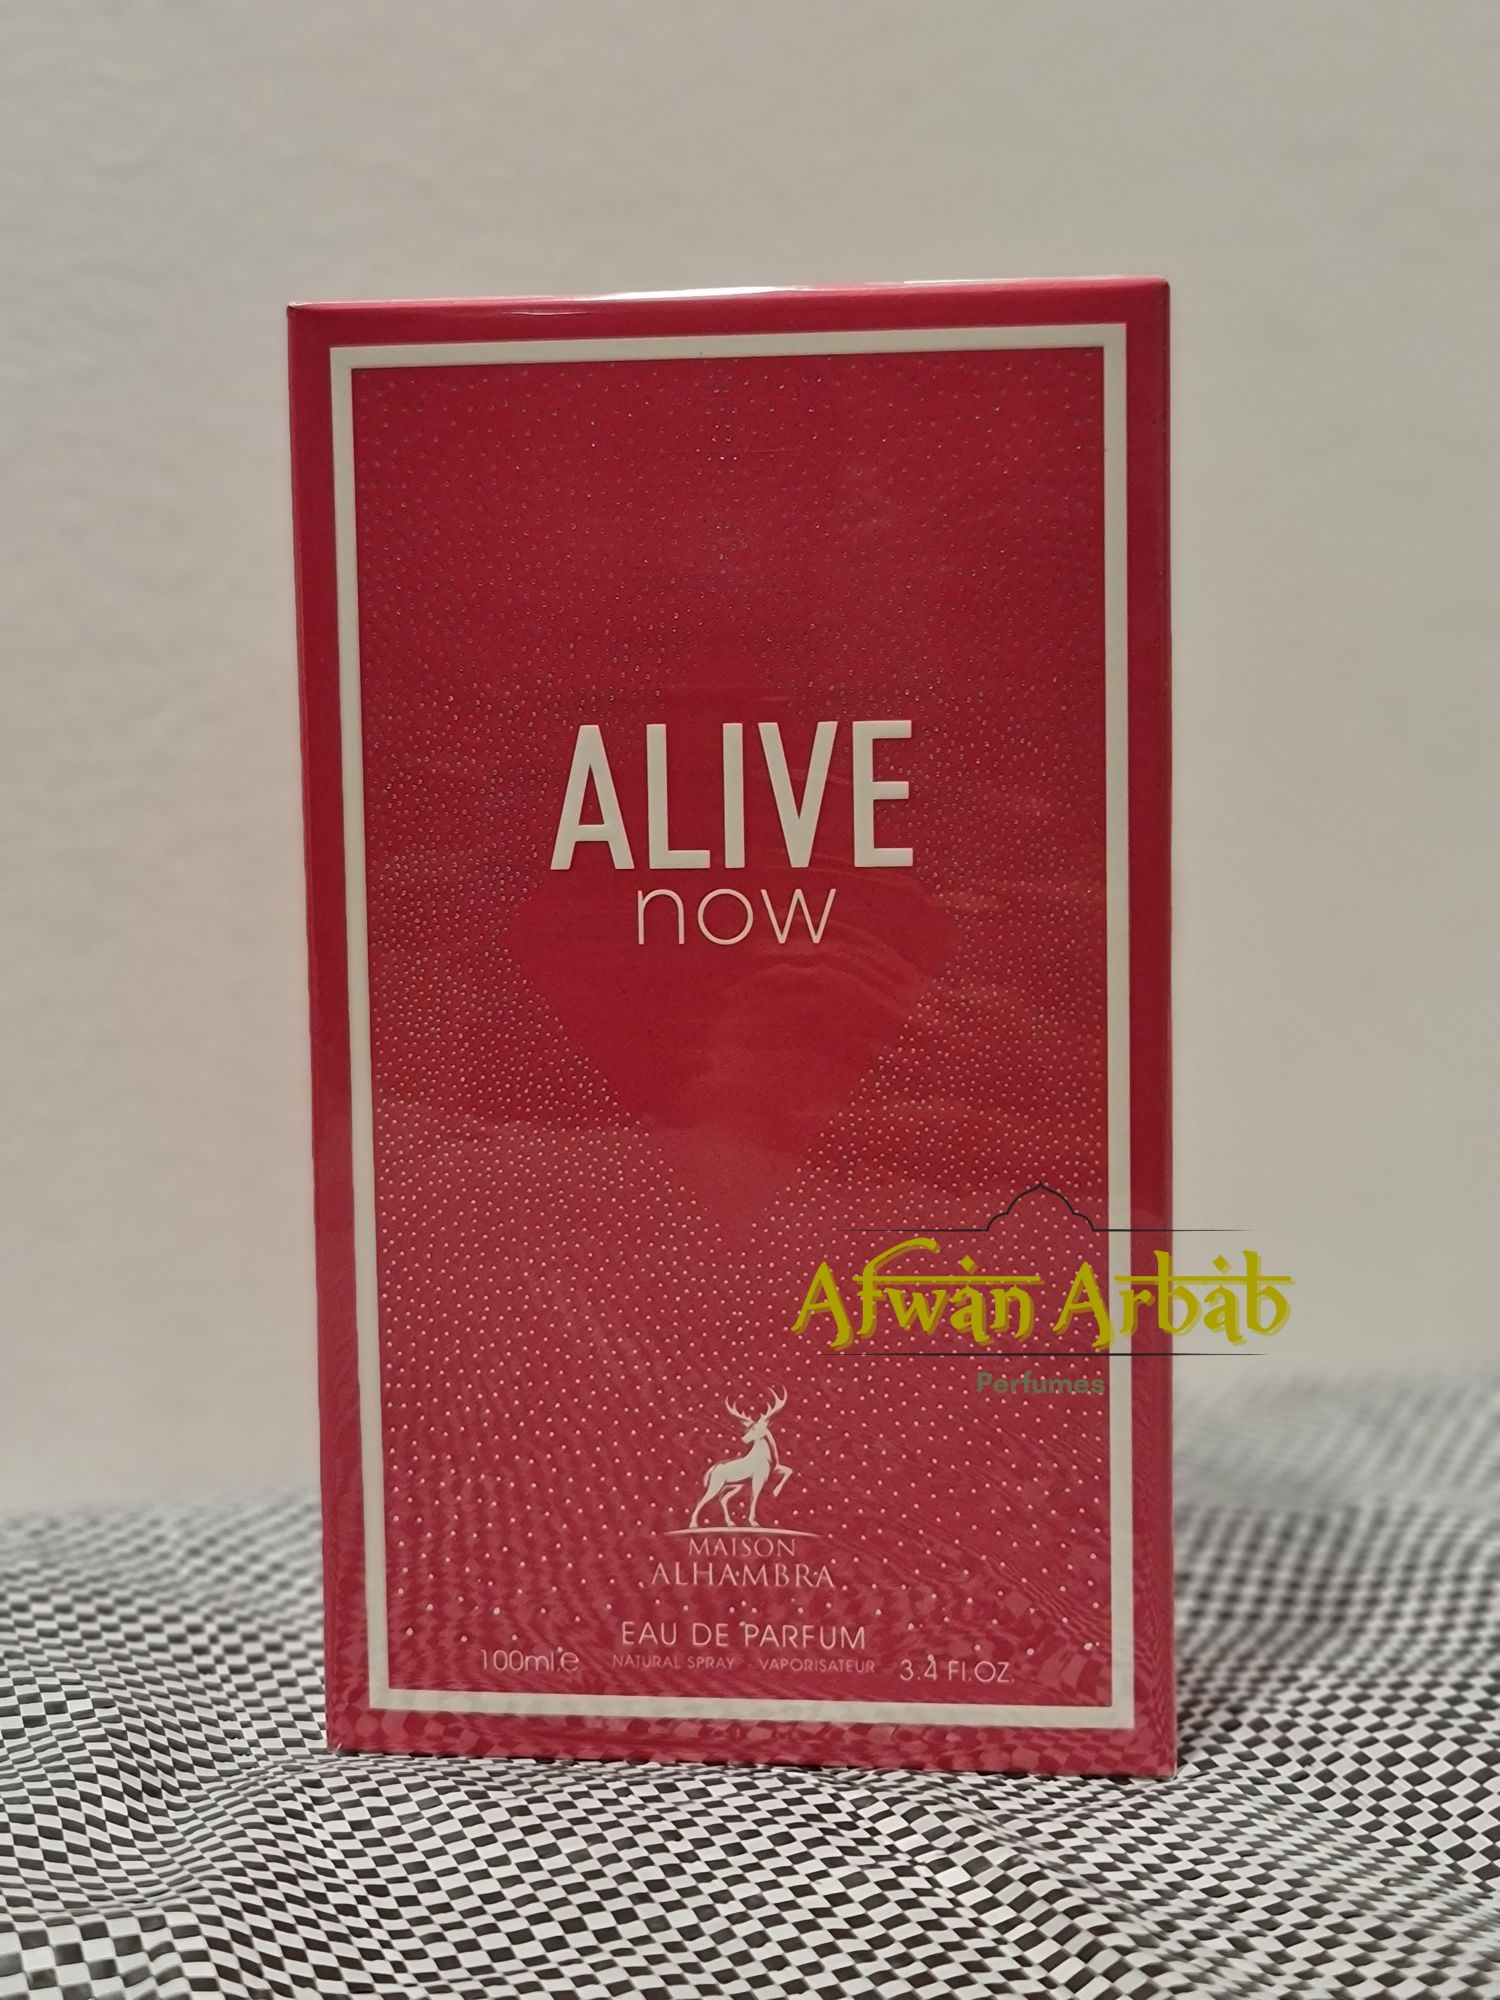 Maison Alhambra Alive Now Perfume For Women is inspired by Boss Alive Eau  de Parfum by Hugo Boss